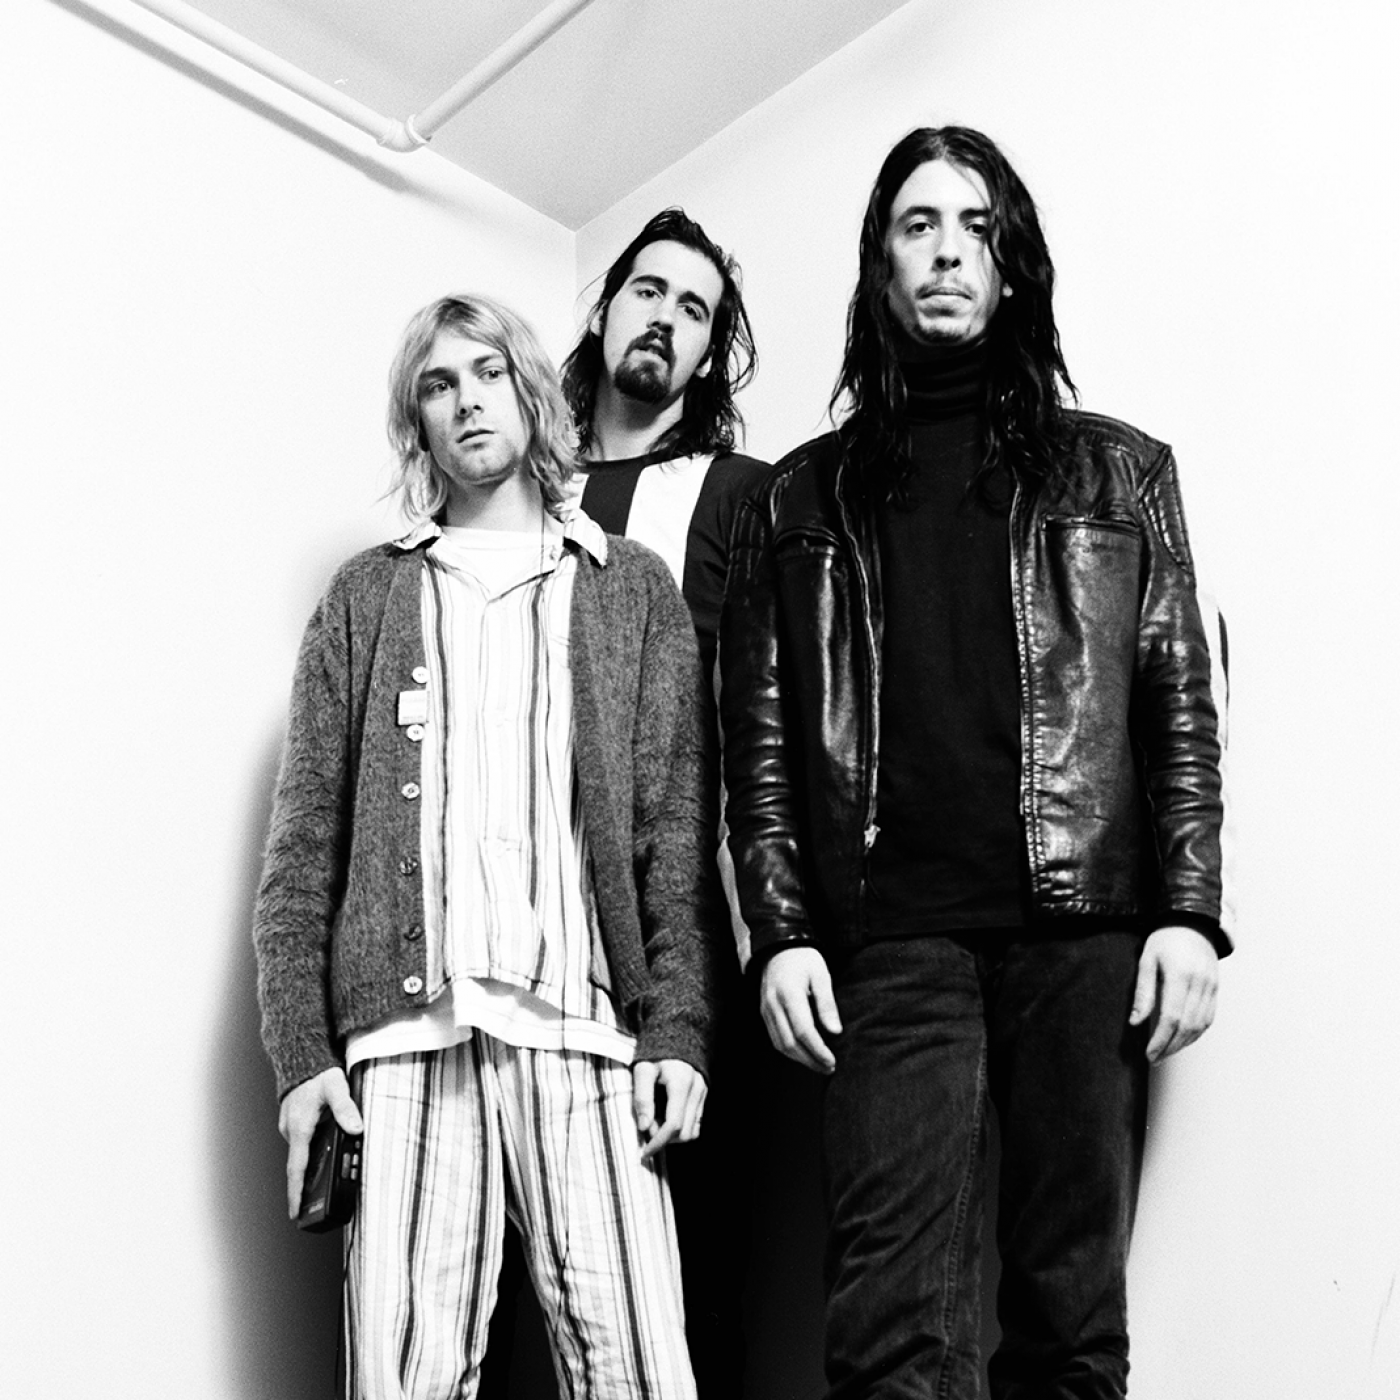 14 Unreleased Nirvana Songs Unearthed, Some Recorded in Brazil